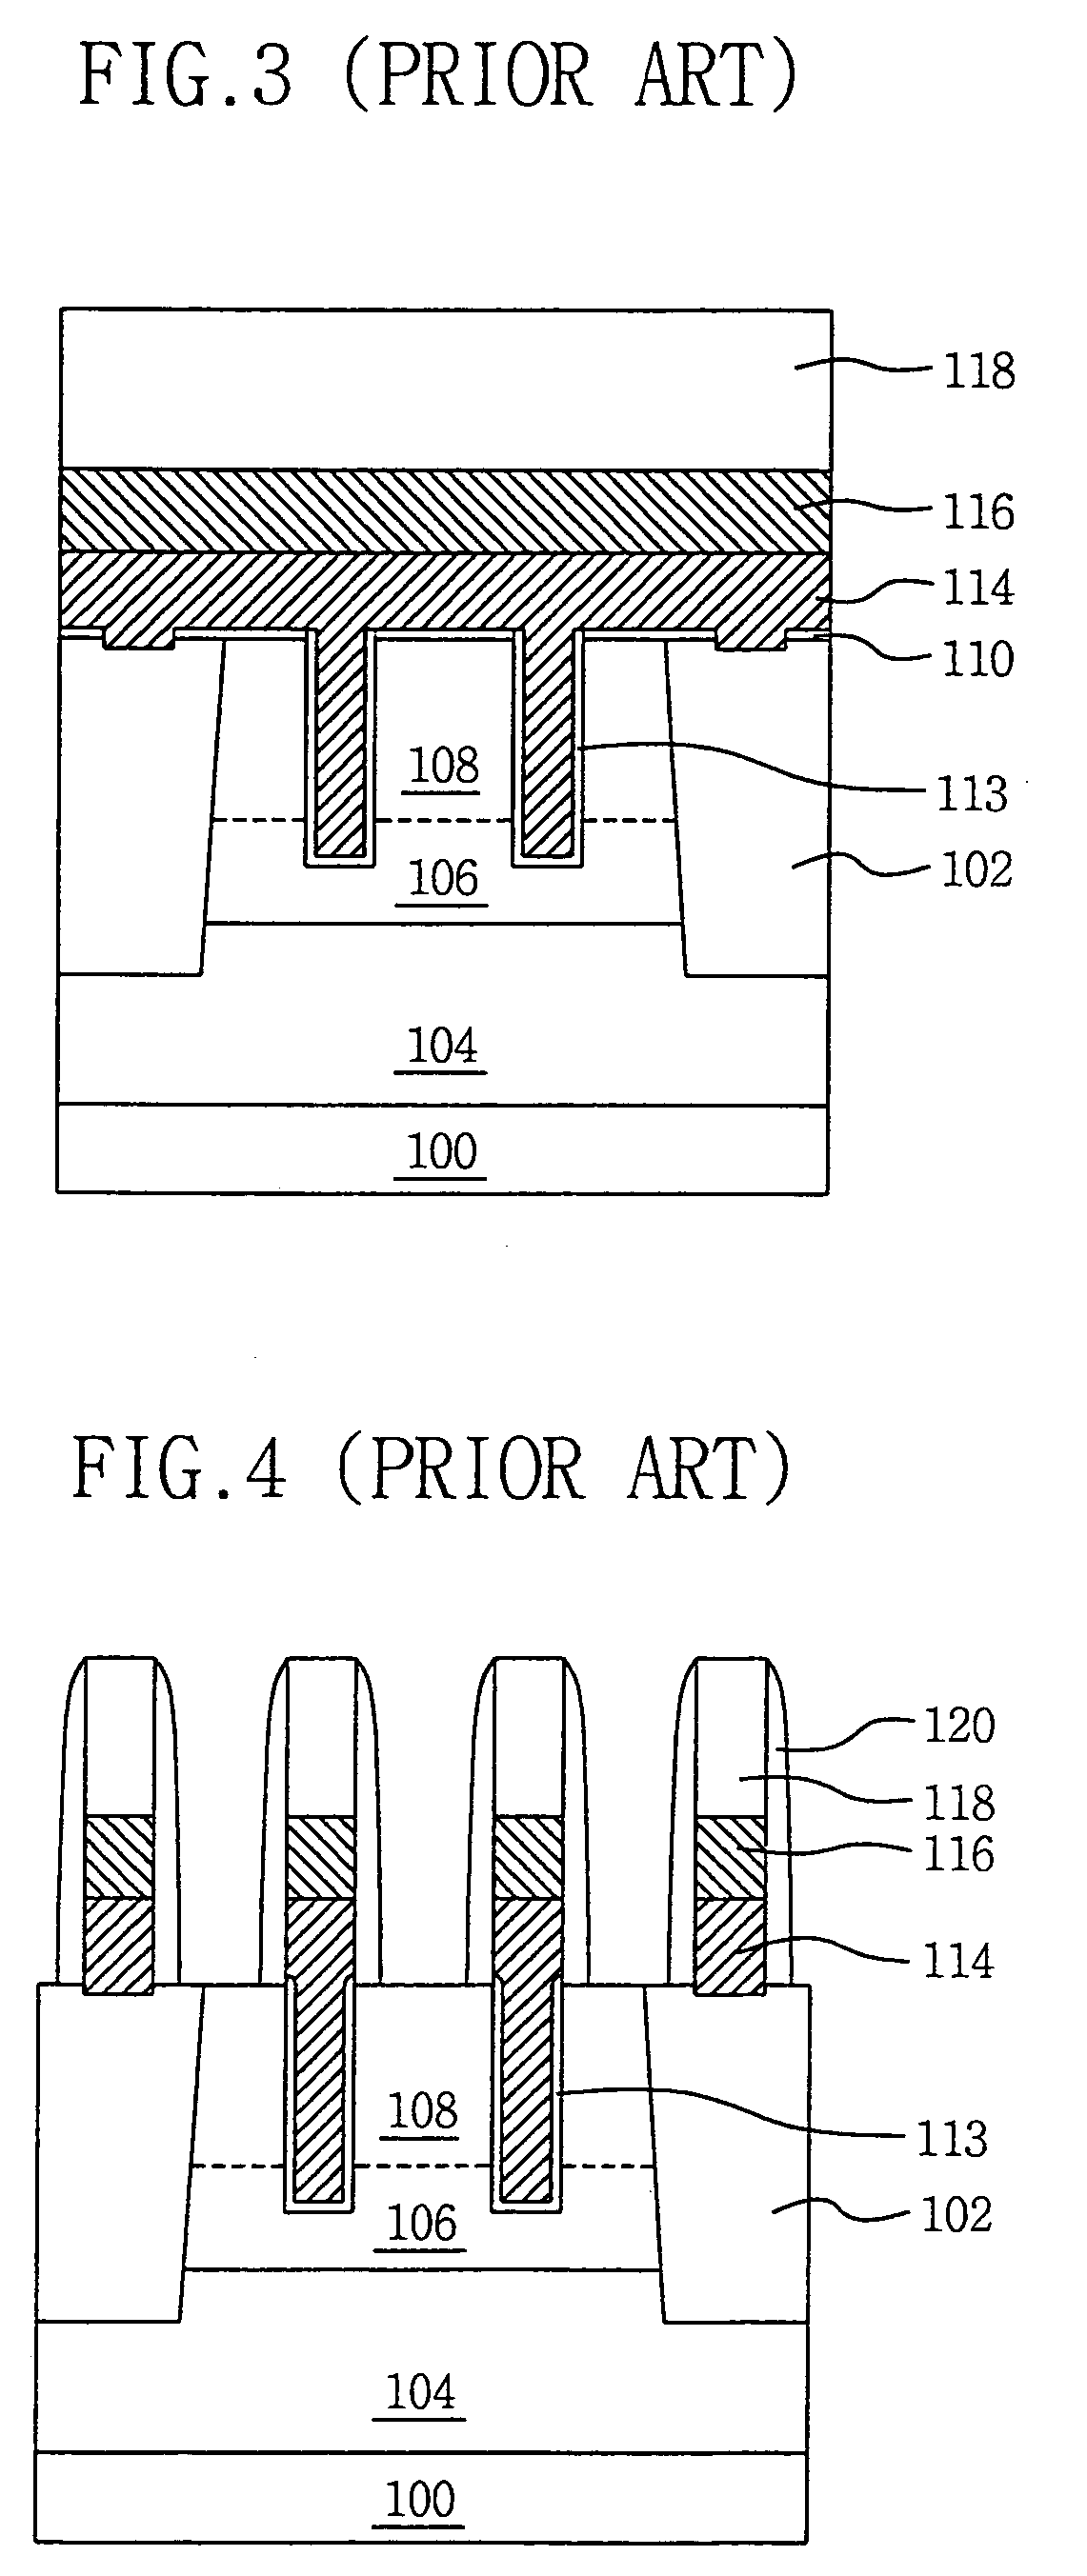 Recess gate transistor structure for use in semiconductor device and method thereof